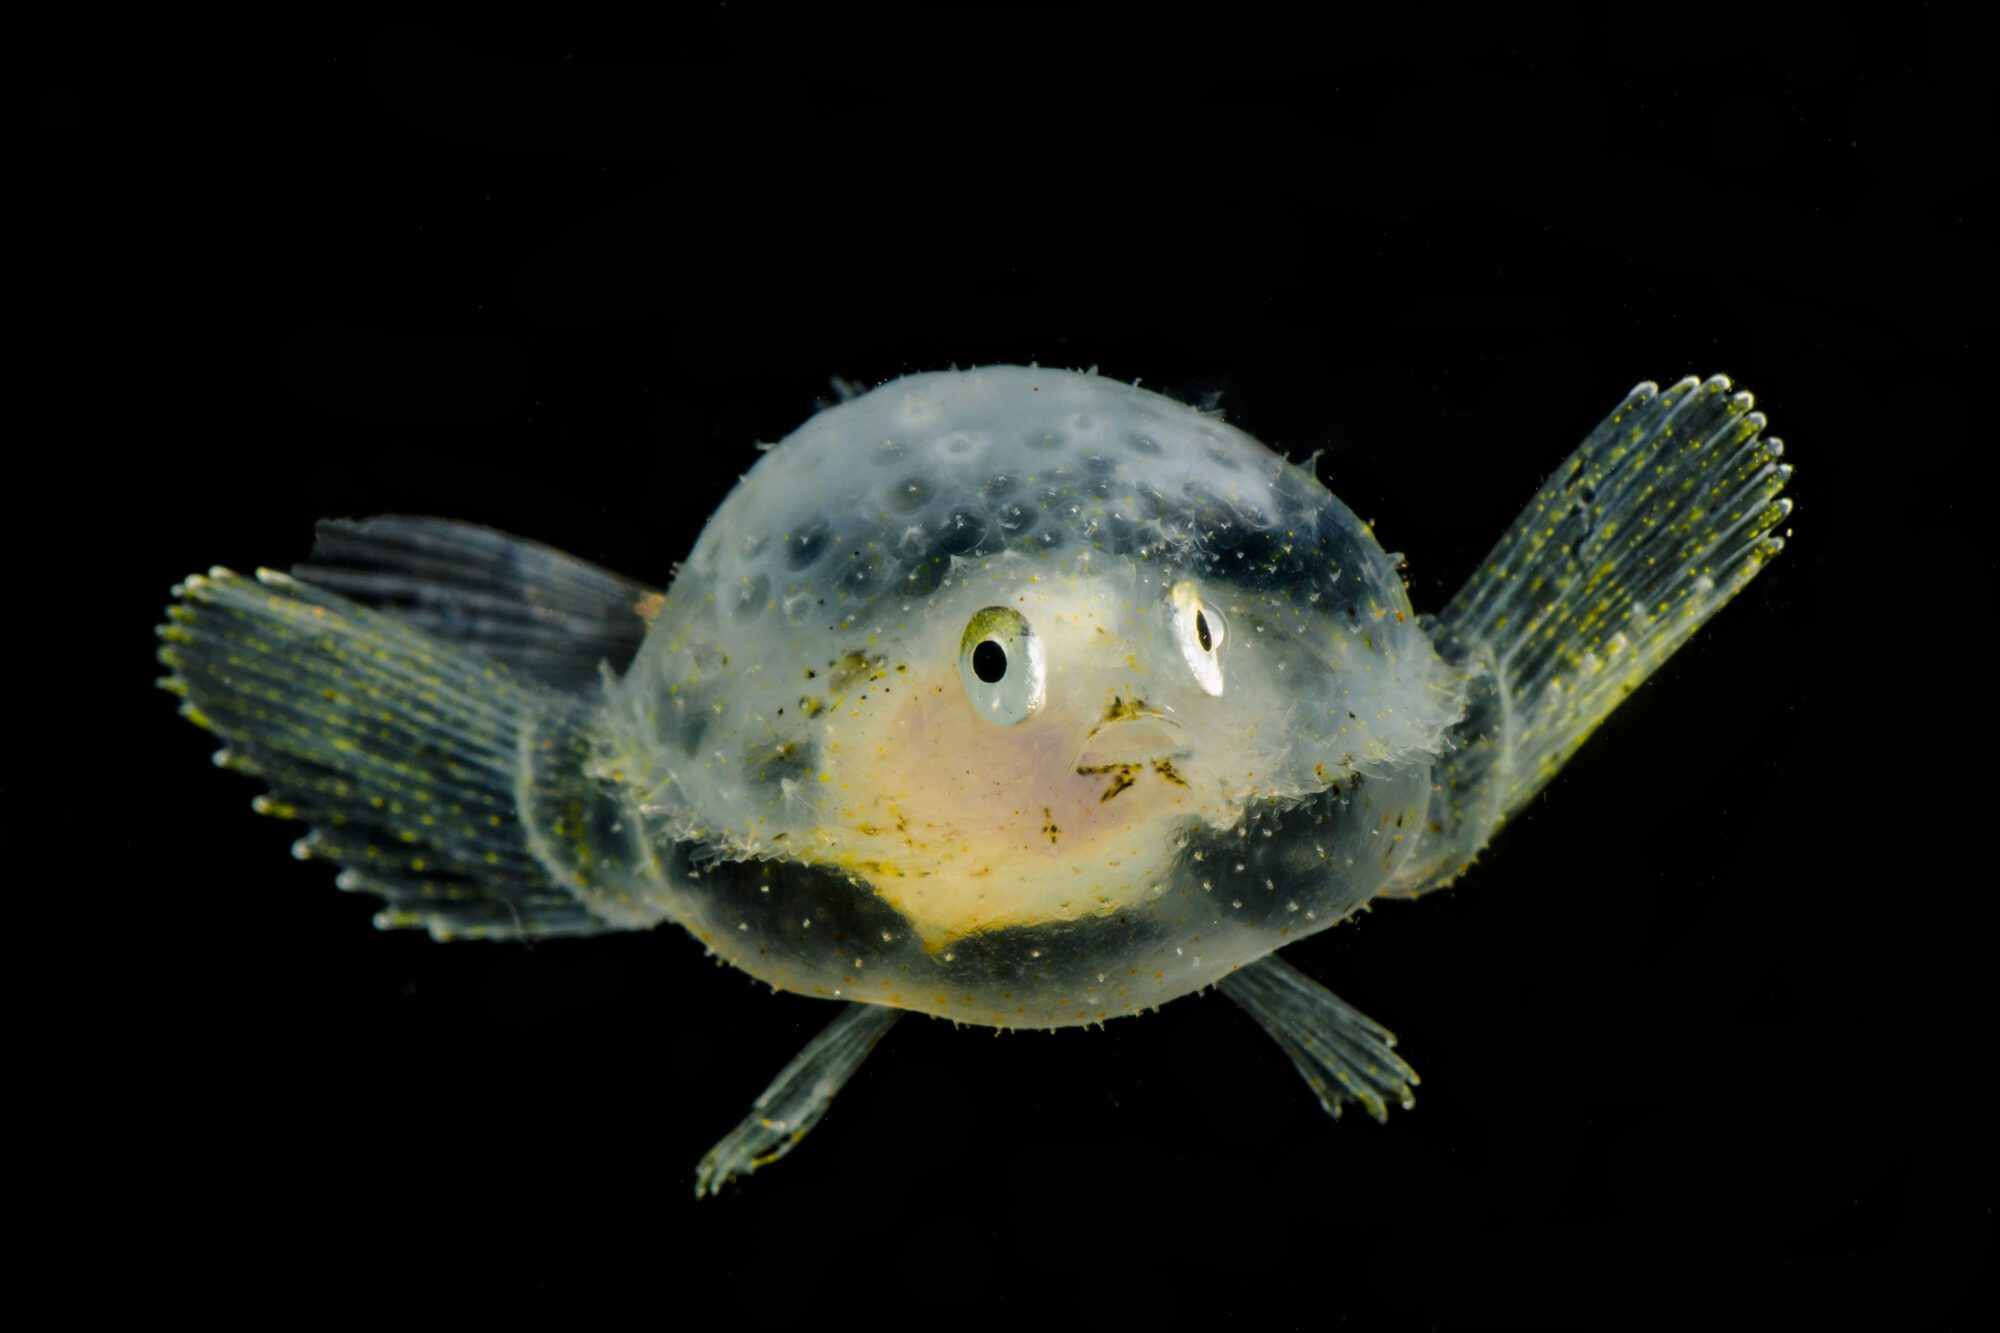 A transluscent flat fish with a greenish yellow fins, a yellow organ visible and googly eyes on either side of its head, against a black background